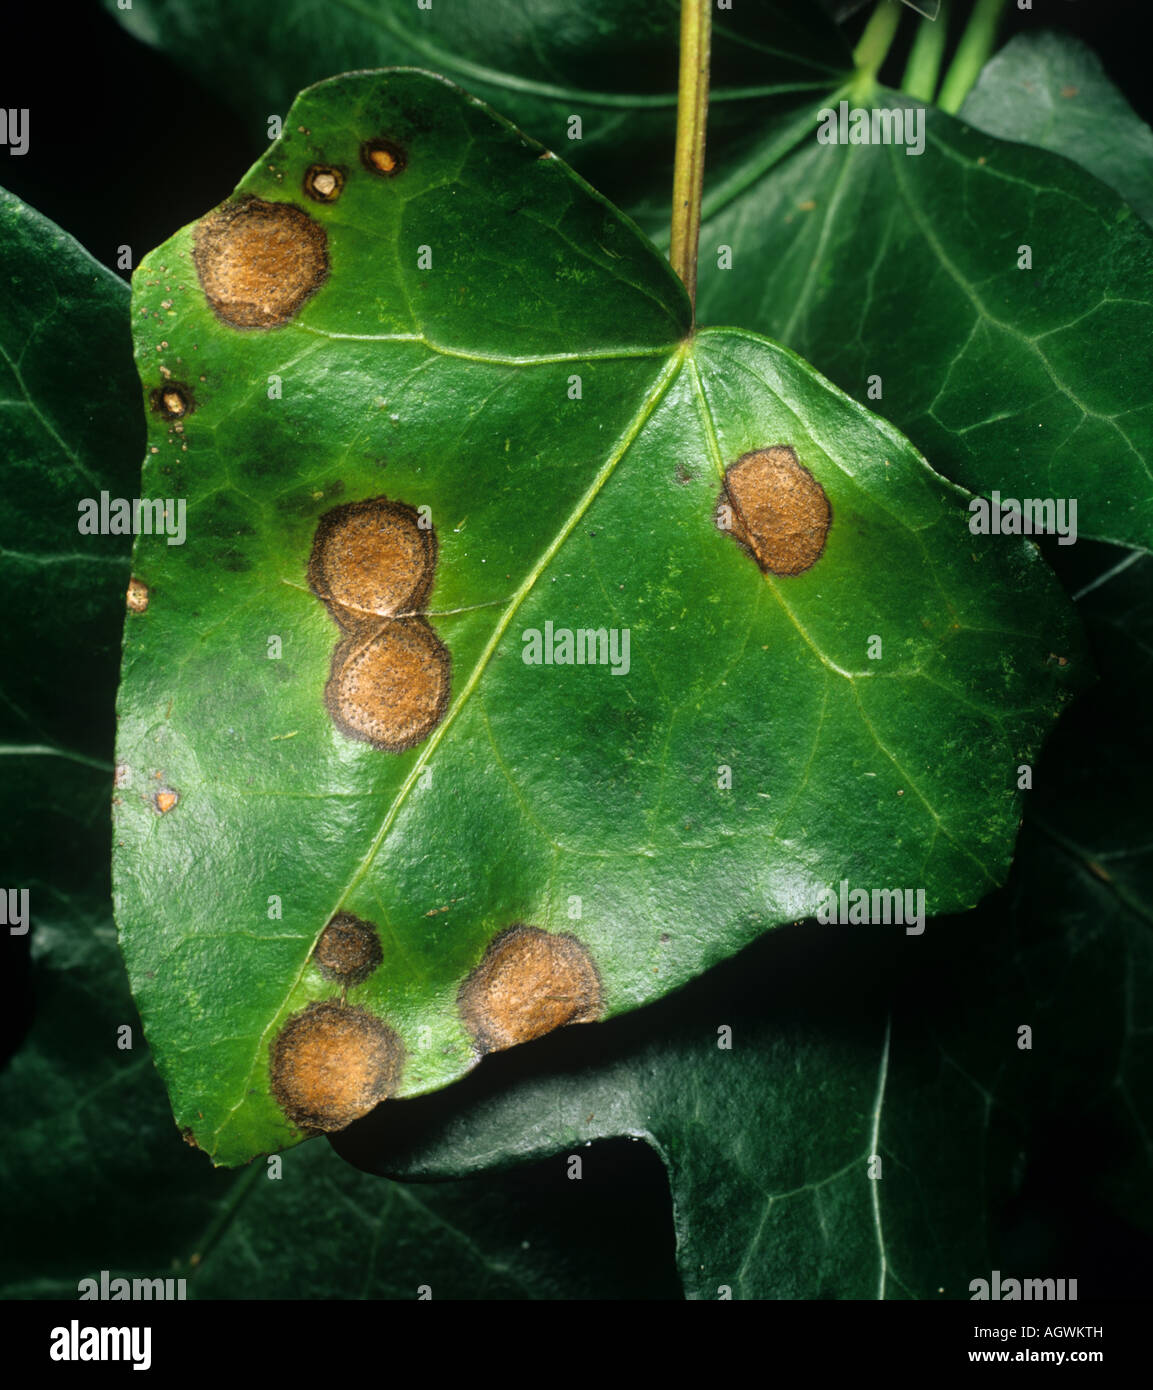 Unconfirmed leaf spot possibly one of several fungi on an ivy leaf Hedera helix Stock Photo